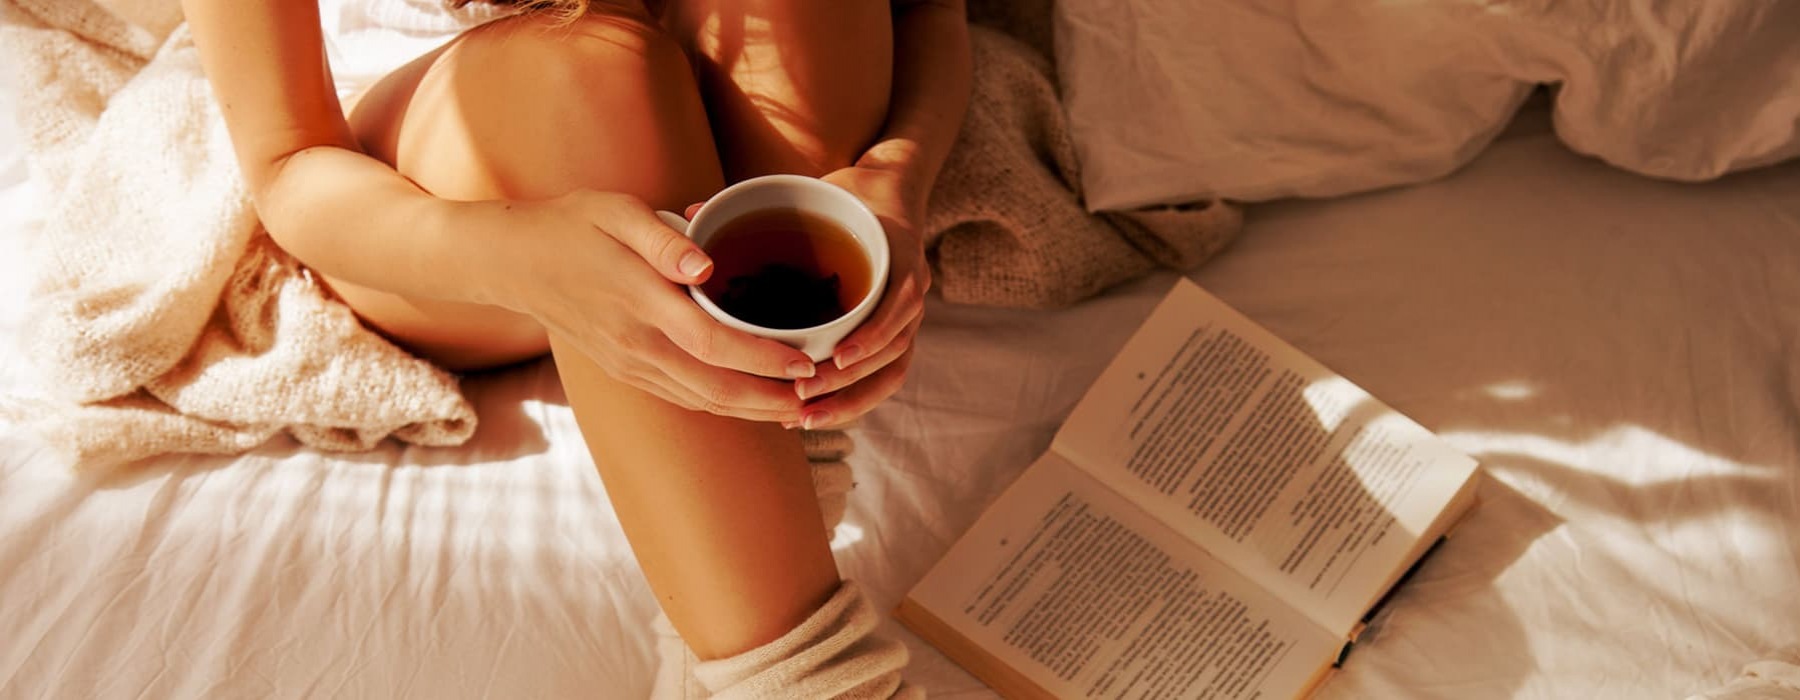 lifestyle image of a person holding a cup of coffee in bed